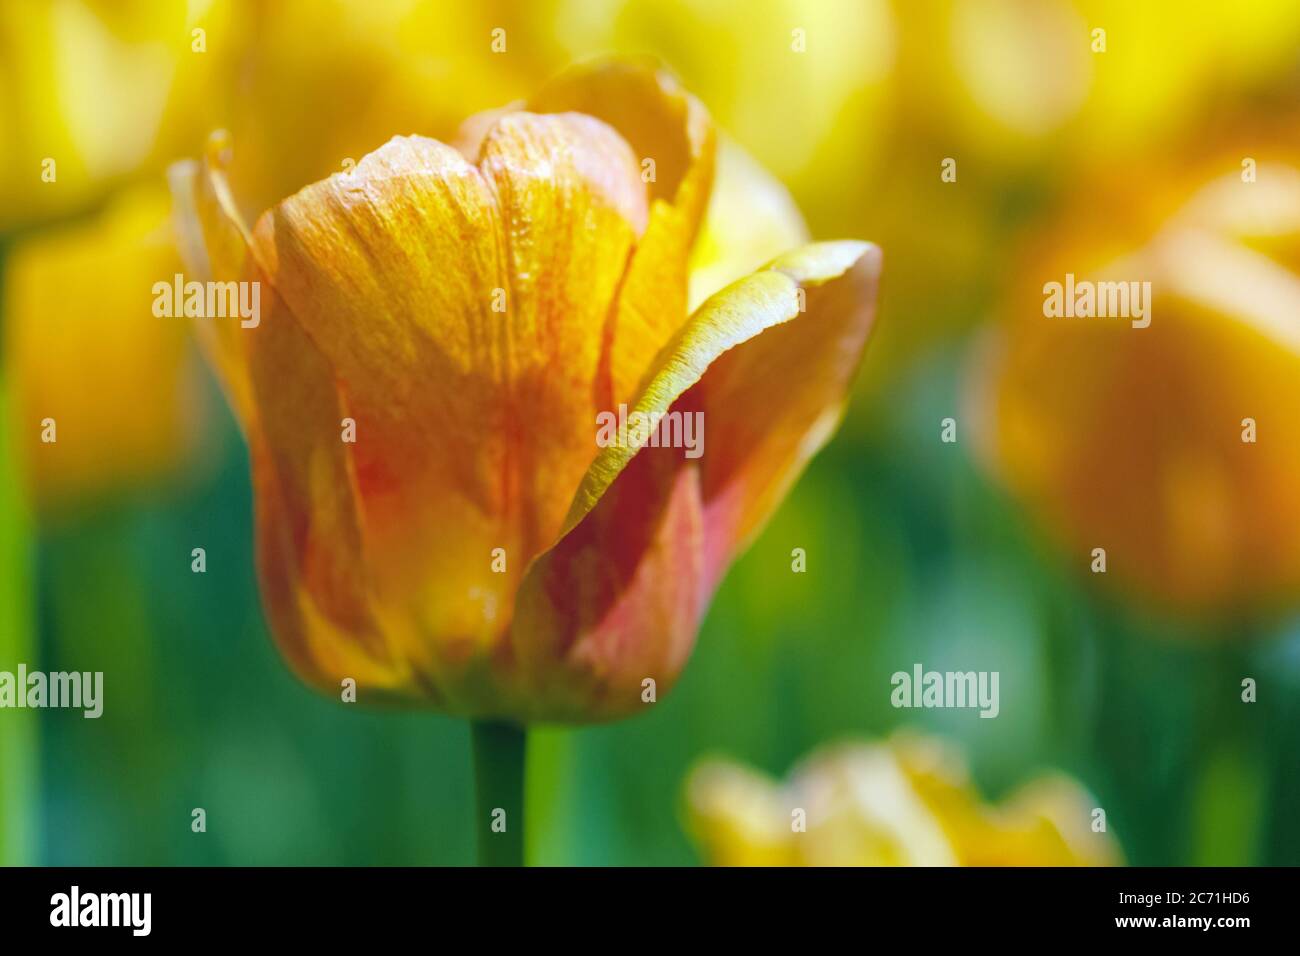 yellow tulips bloom in spring garden, close up Stock Photo